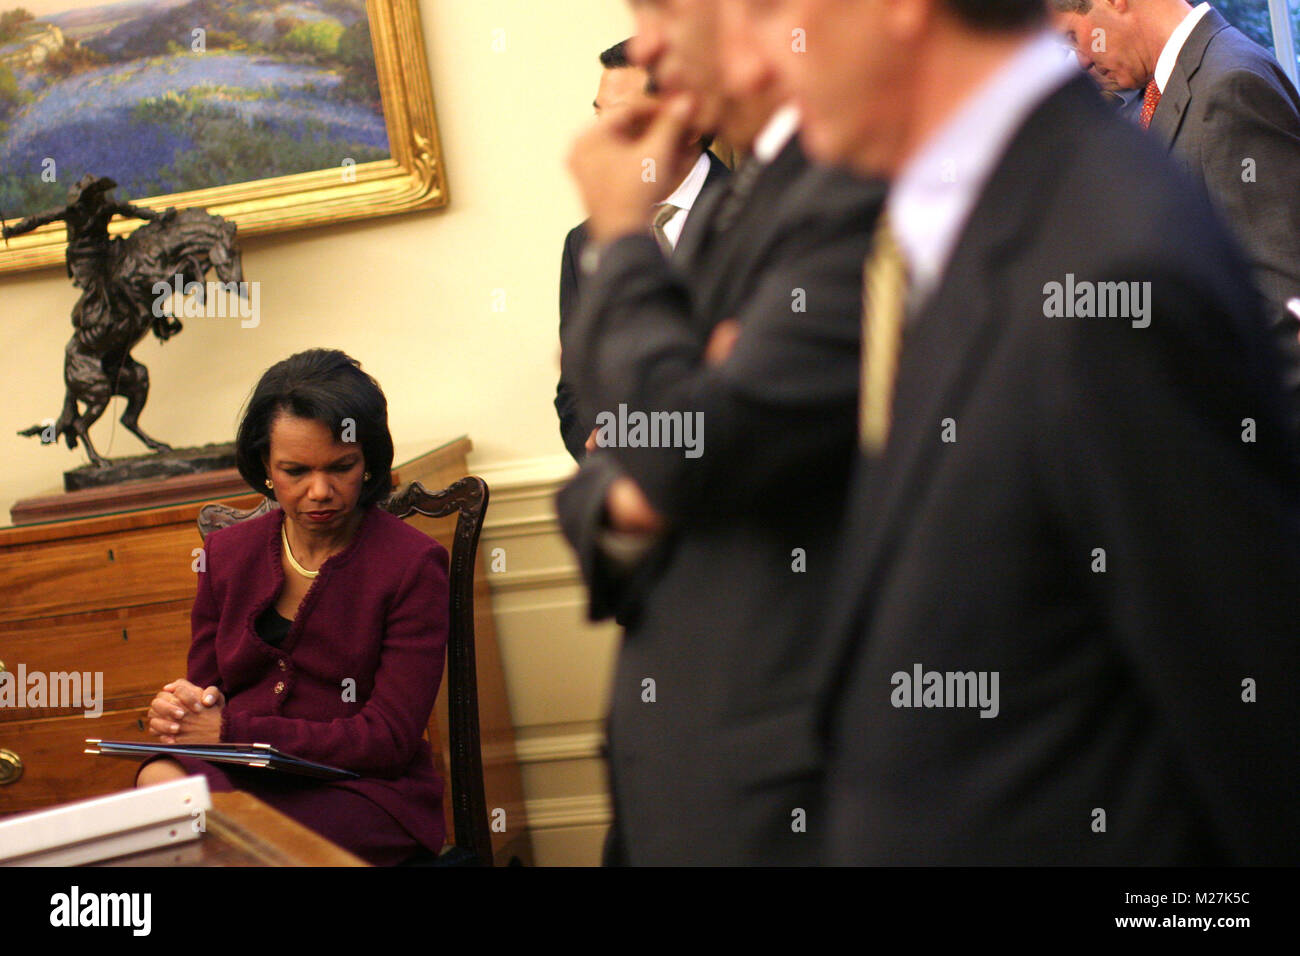 Washington, DC - December 19, 2008 -- United States Secretary of State Condolezza Rice listens as United States President George W. Bush meets with the President Mahmoud Abbas (Abu Mazen) of the Palestinian Authority in the Oval Office of the White House in Washington DC on Friday, December 19, 2008..Credit: Ken Cedeno / Pool via CNP /MediaPunch Stock Photo